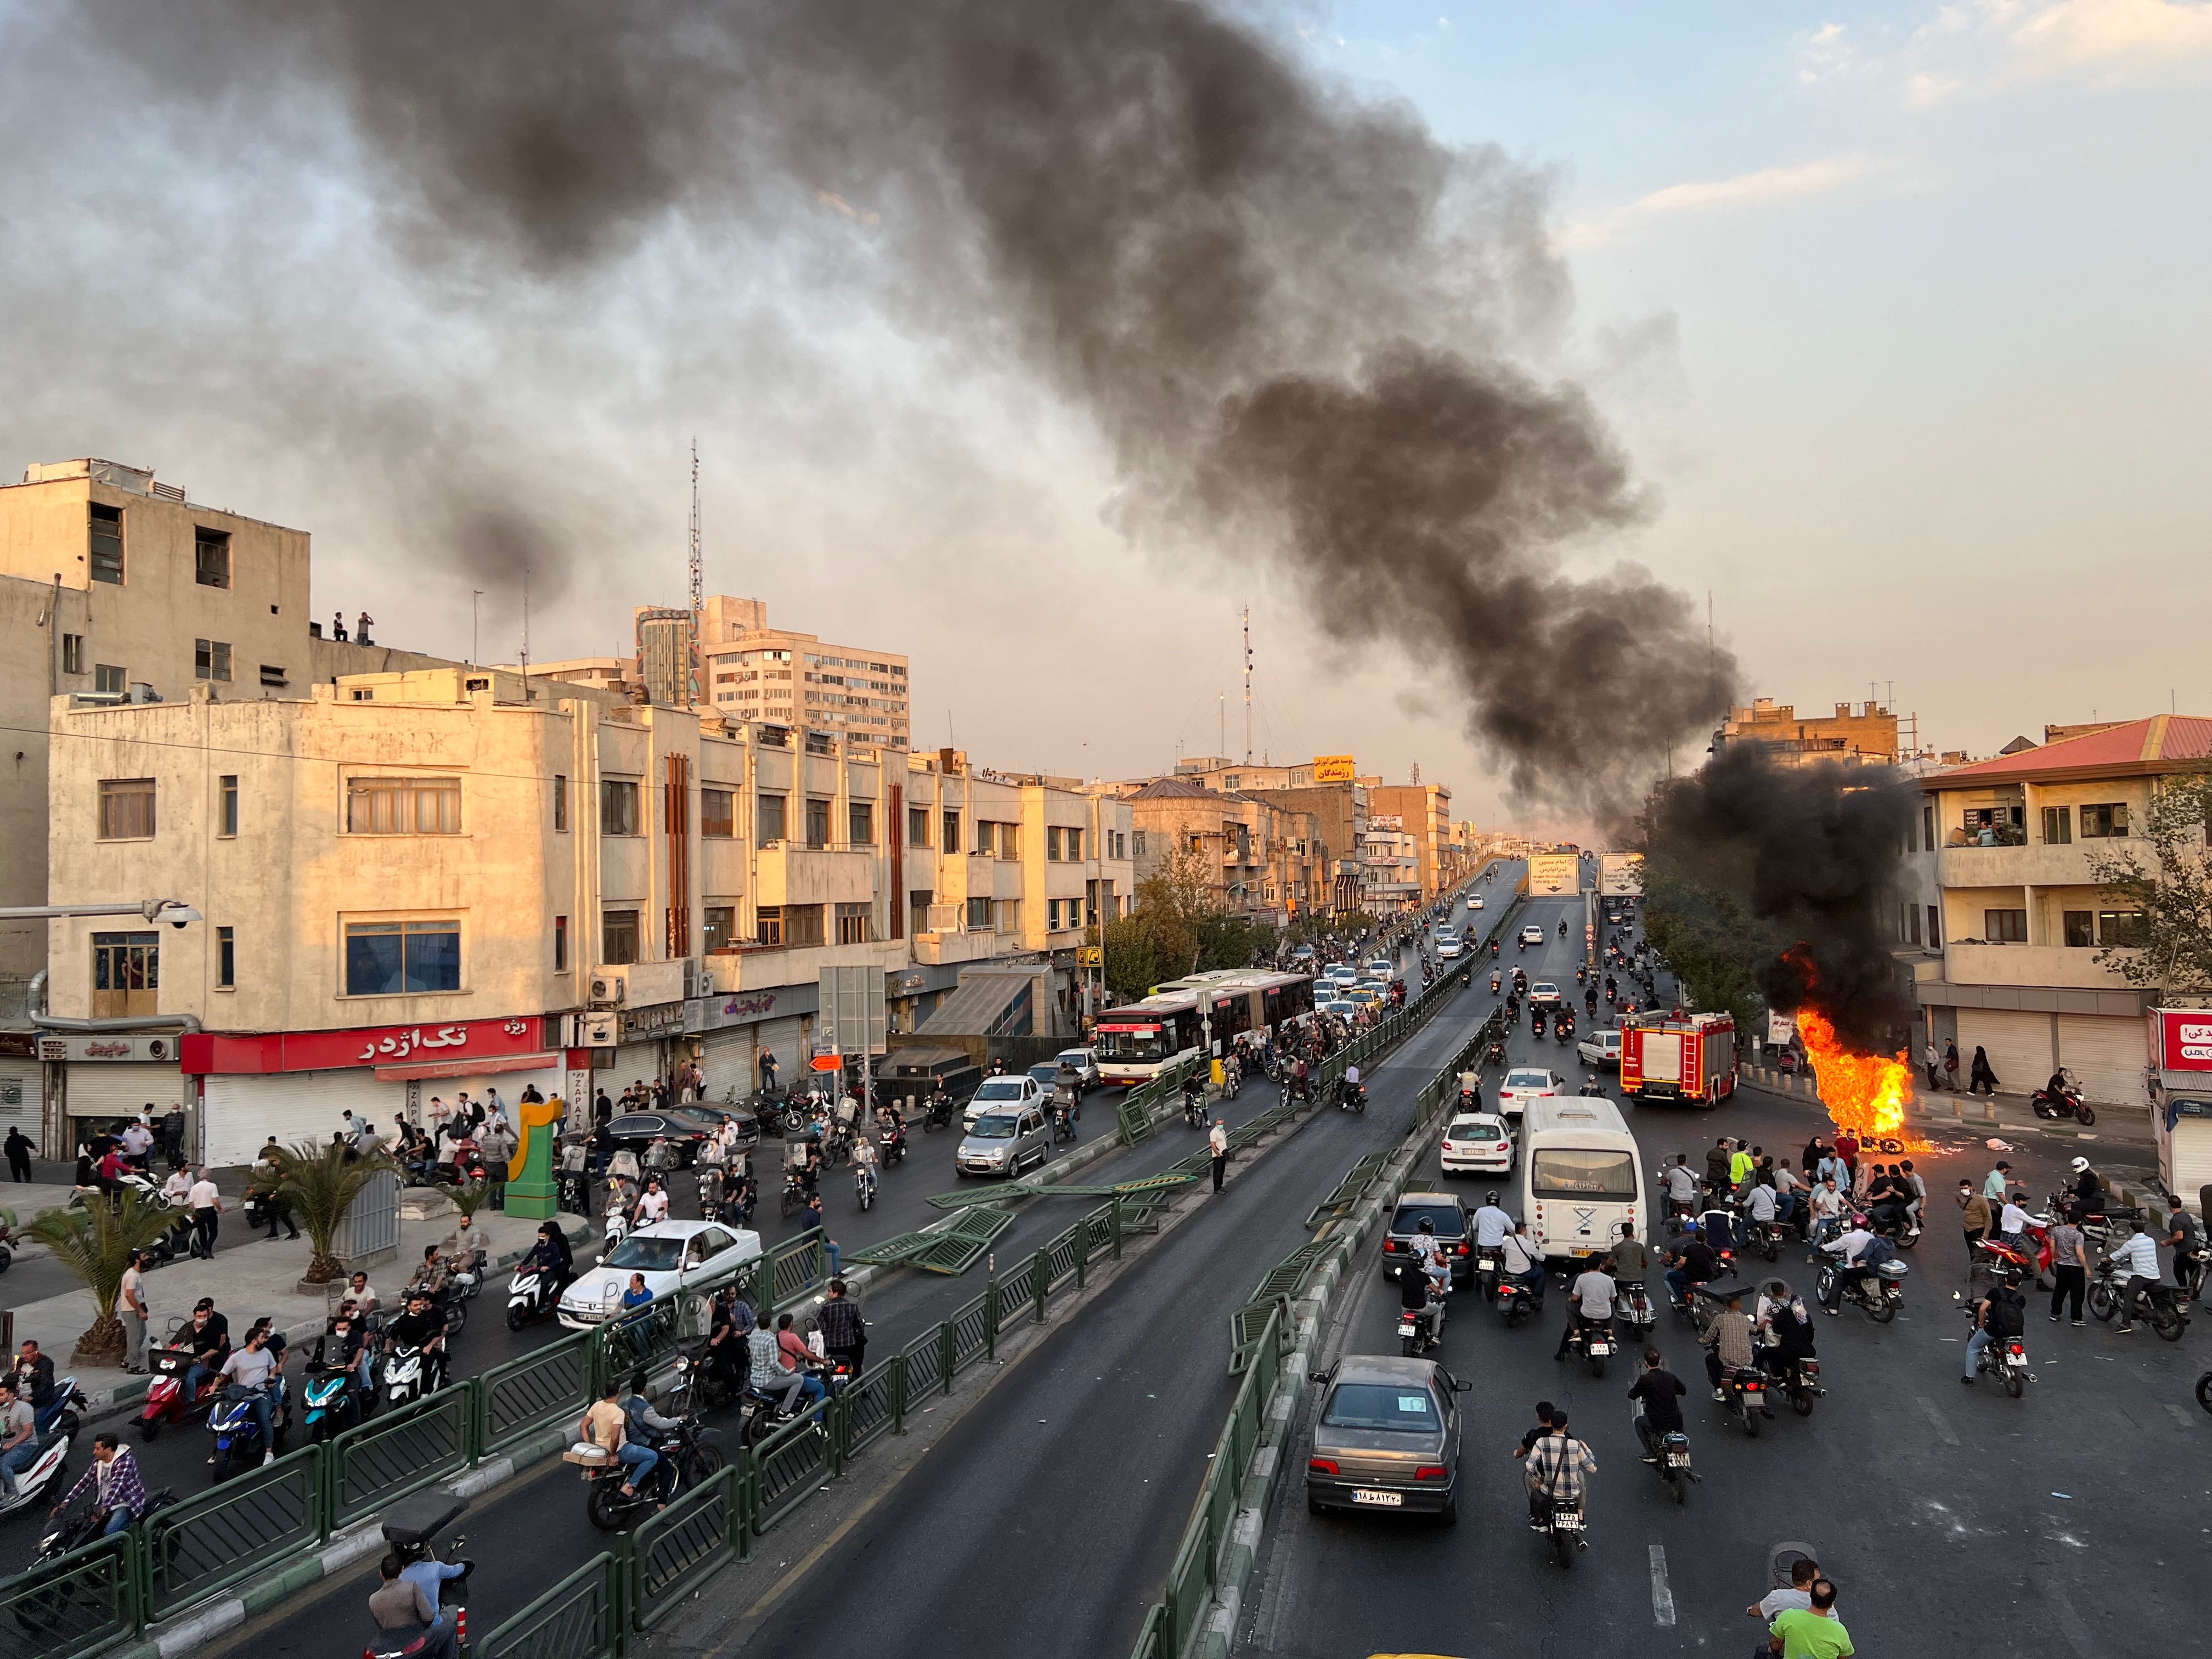 Iran has been hit by the biggest wave of social unrest in years